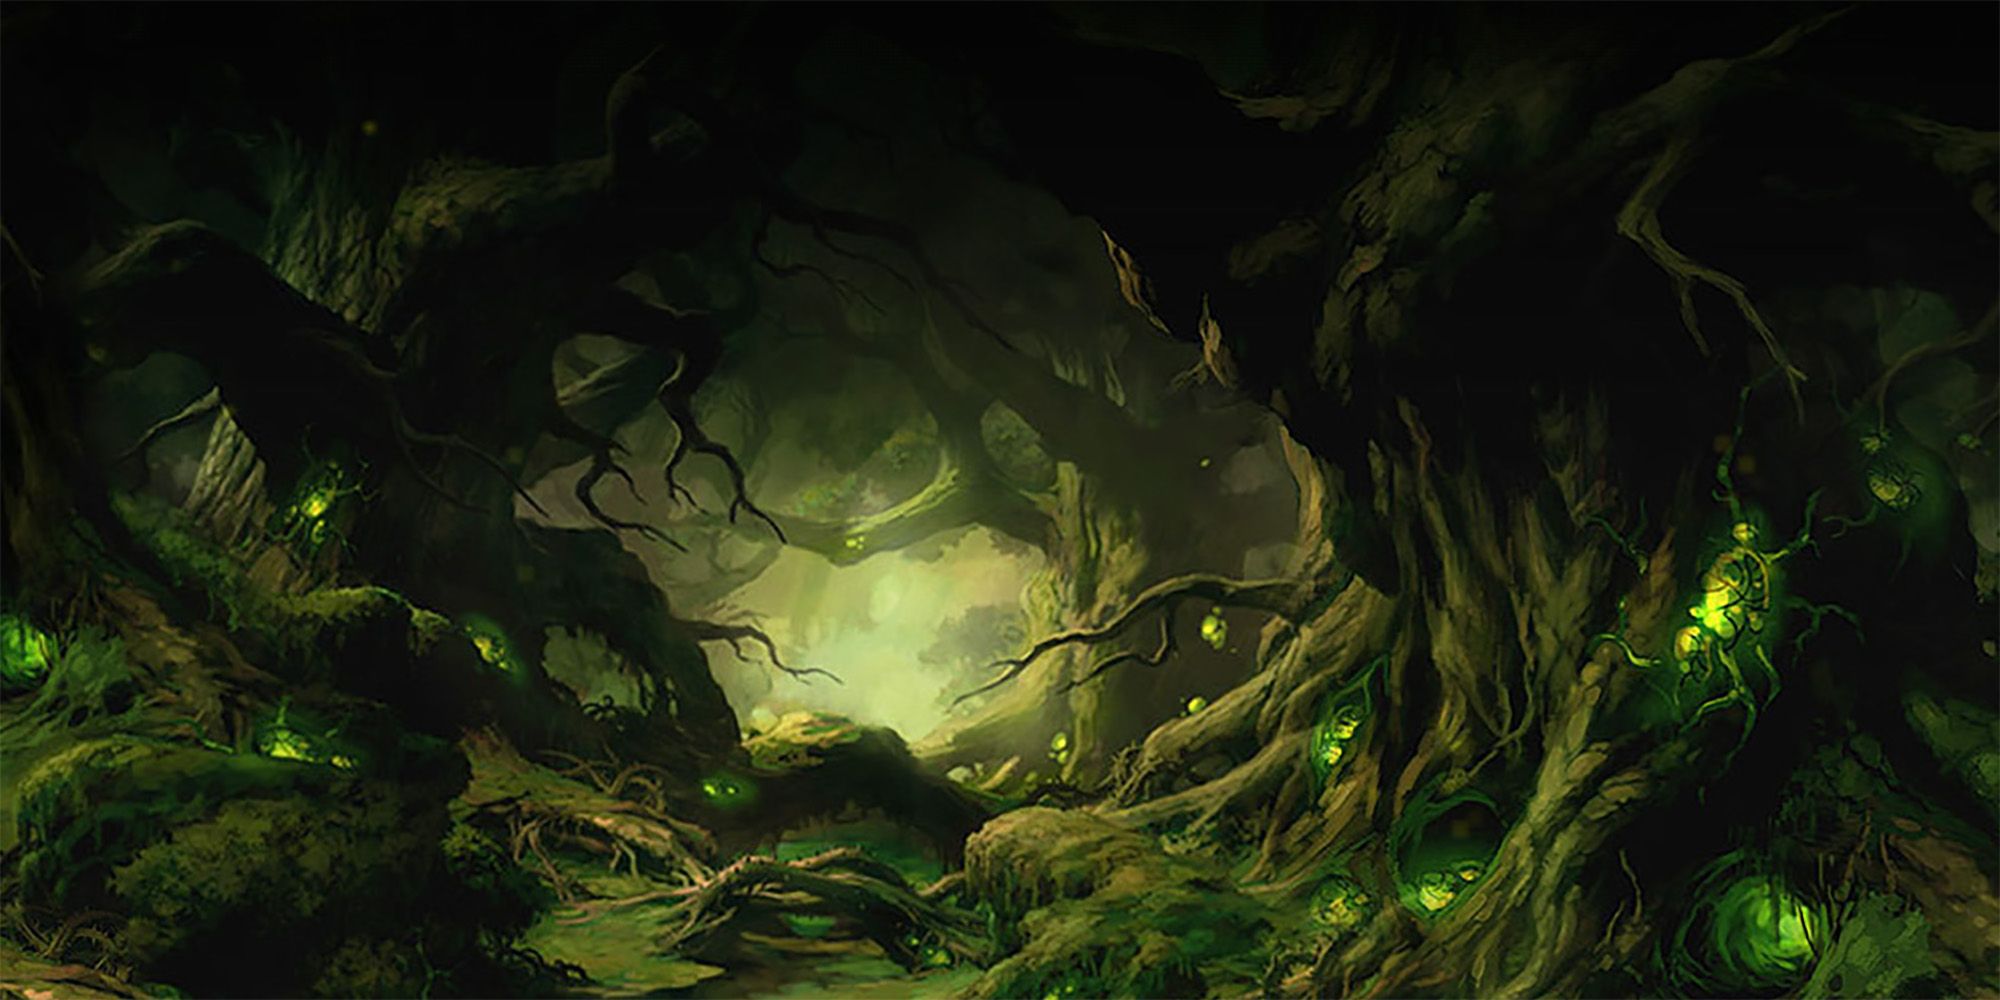 A dark and spooky fey forest in DnD.